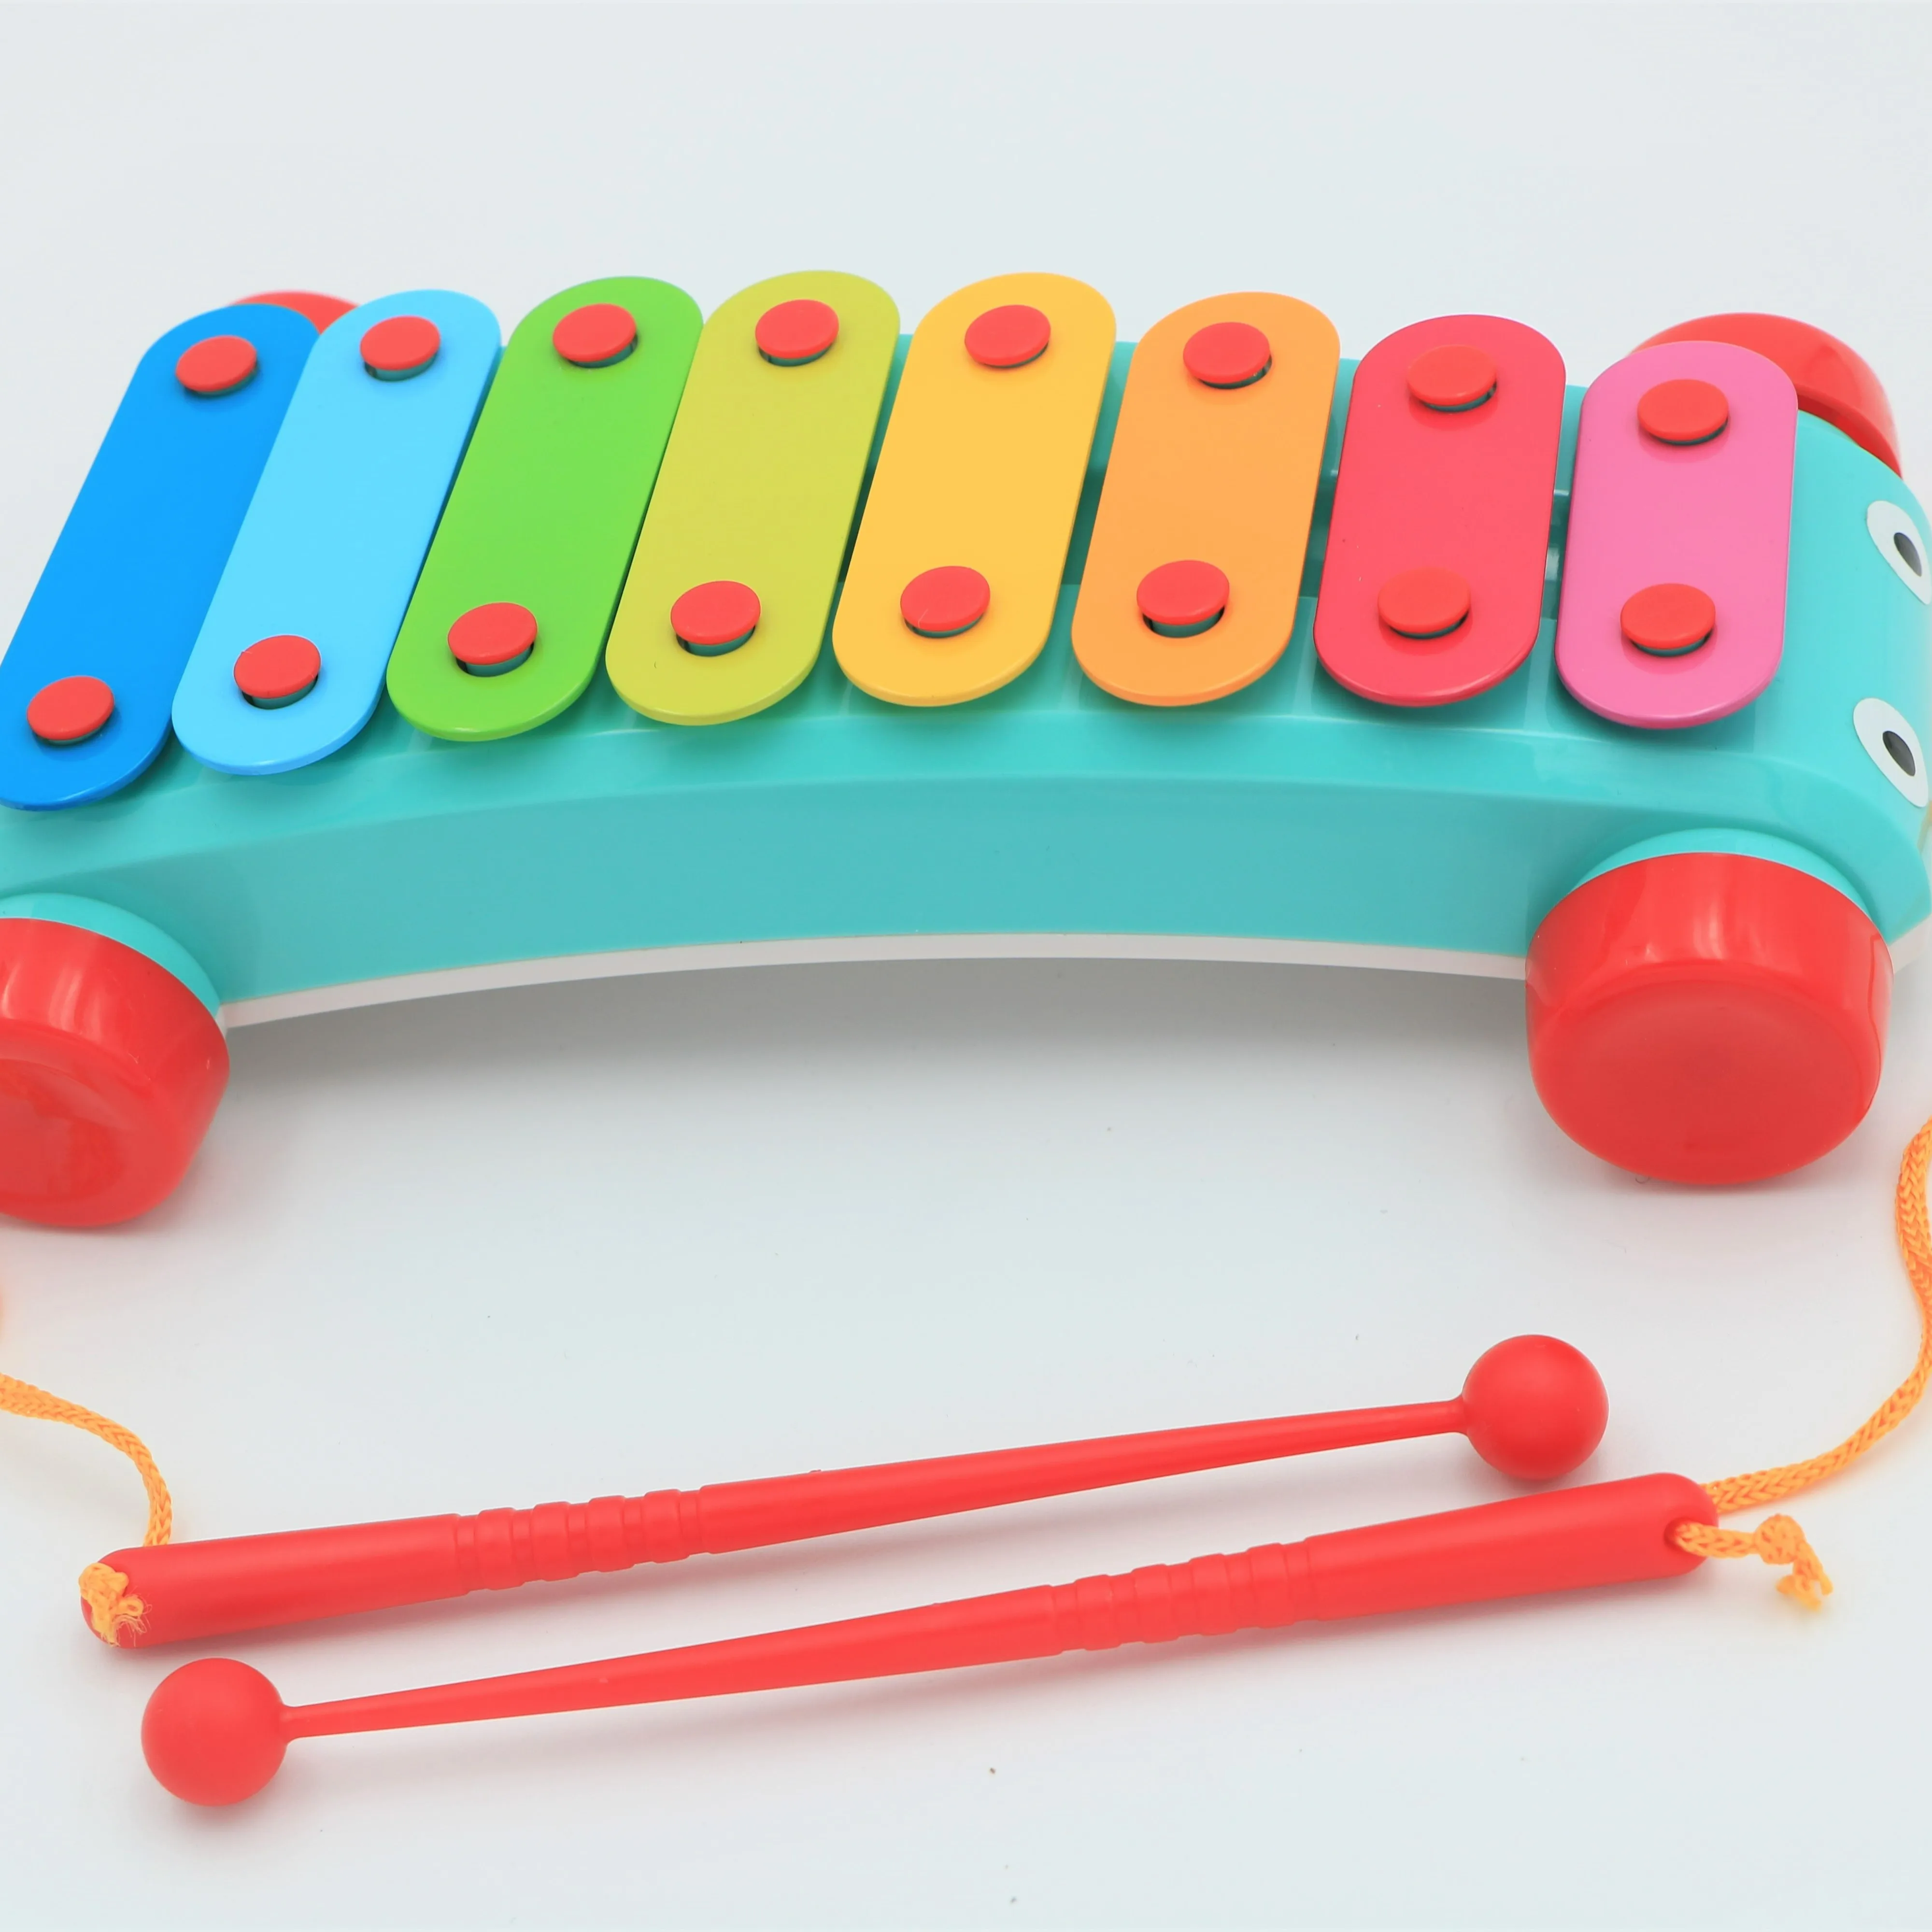 Deats Brand wholesale cheap Music Instruments Kids Wooden toys wood handmade xylophone for kids